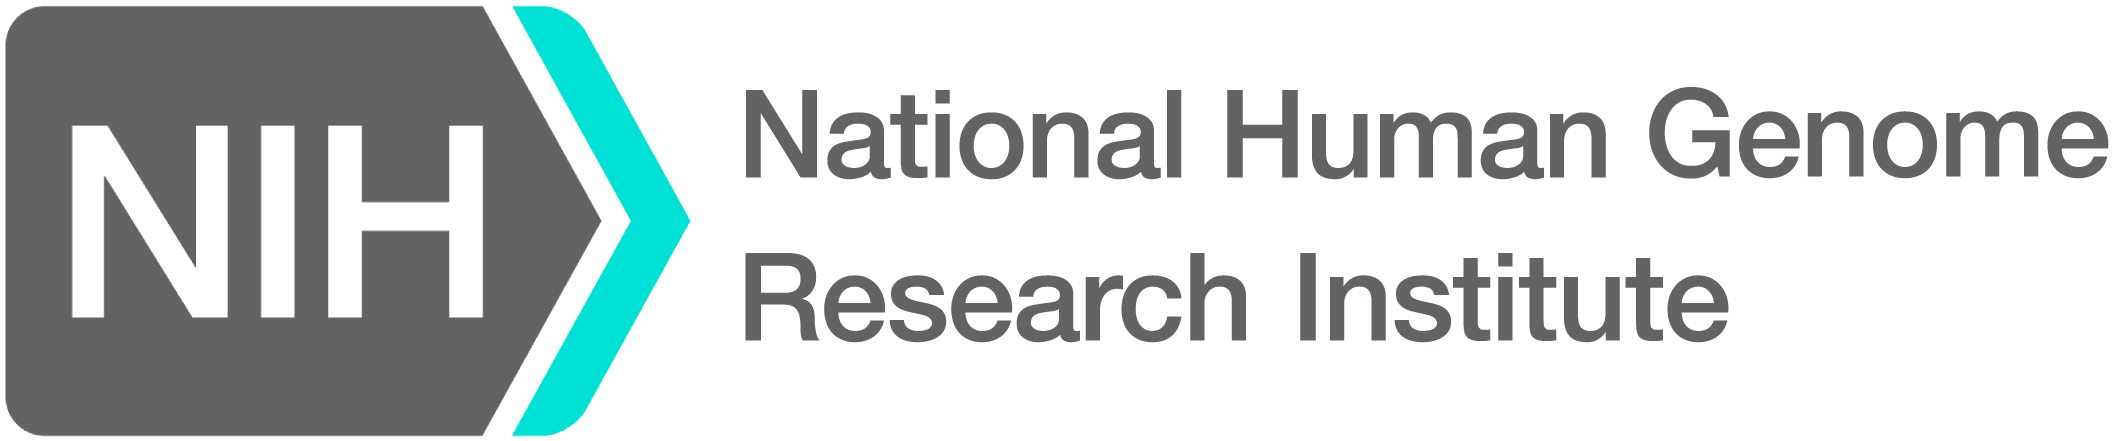 National Human Genome Research Institute